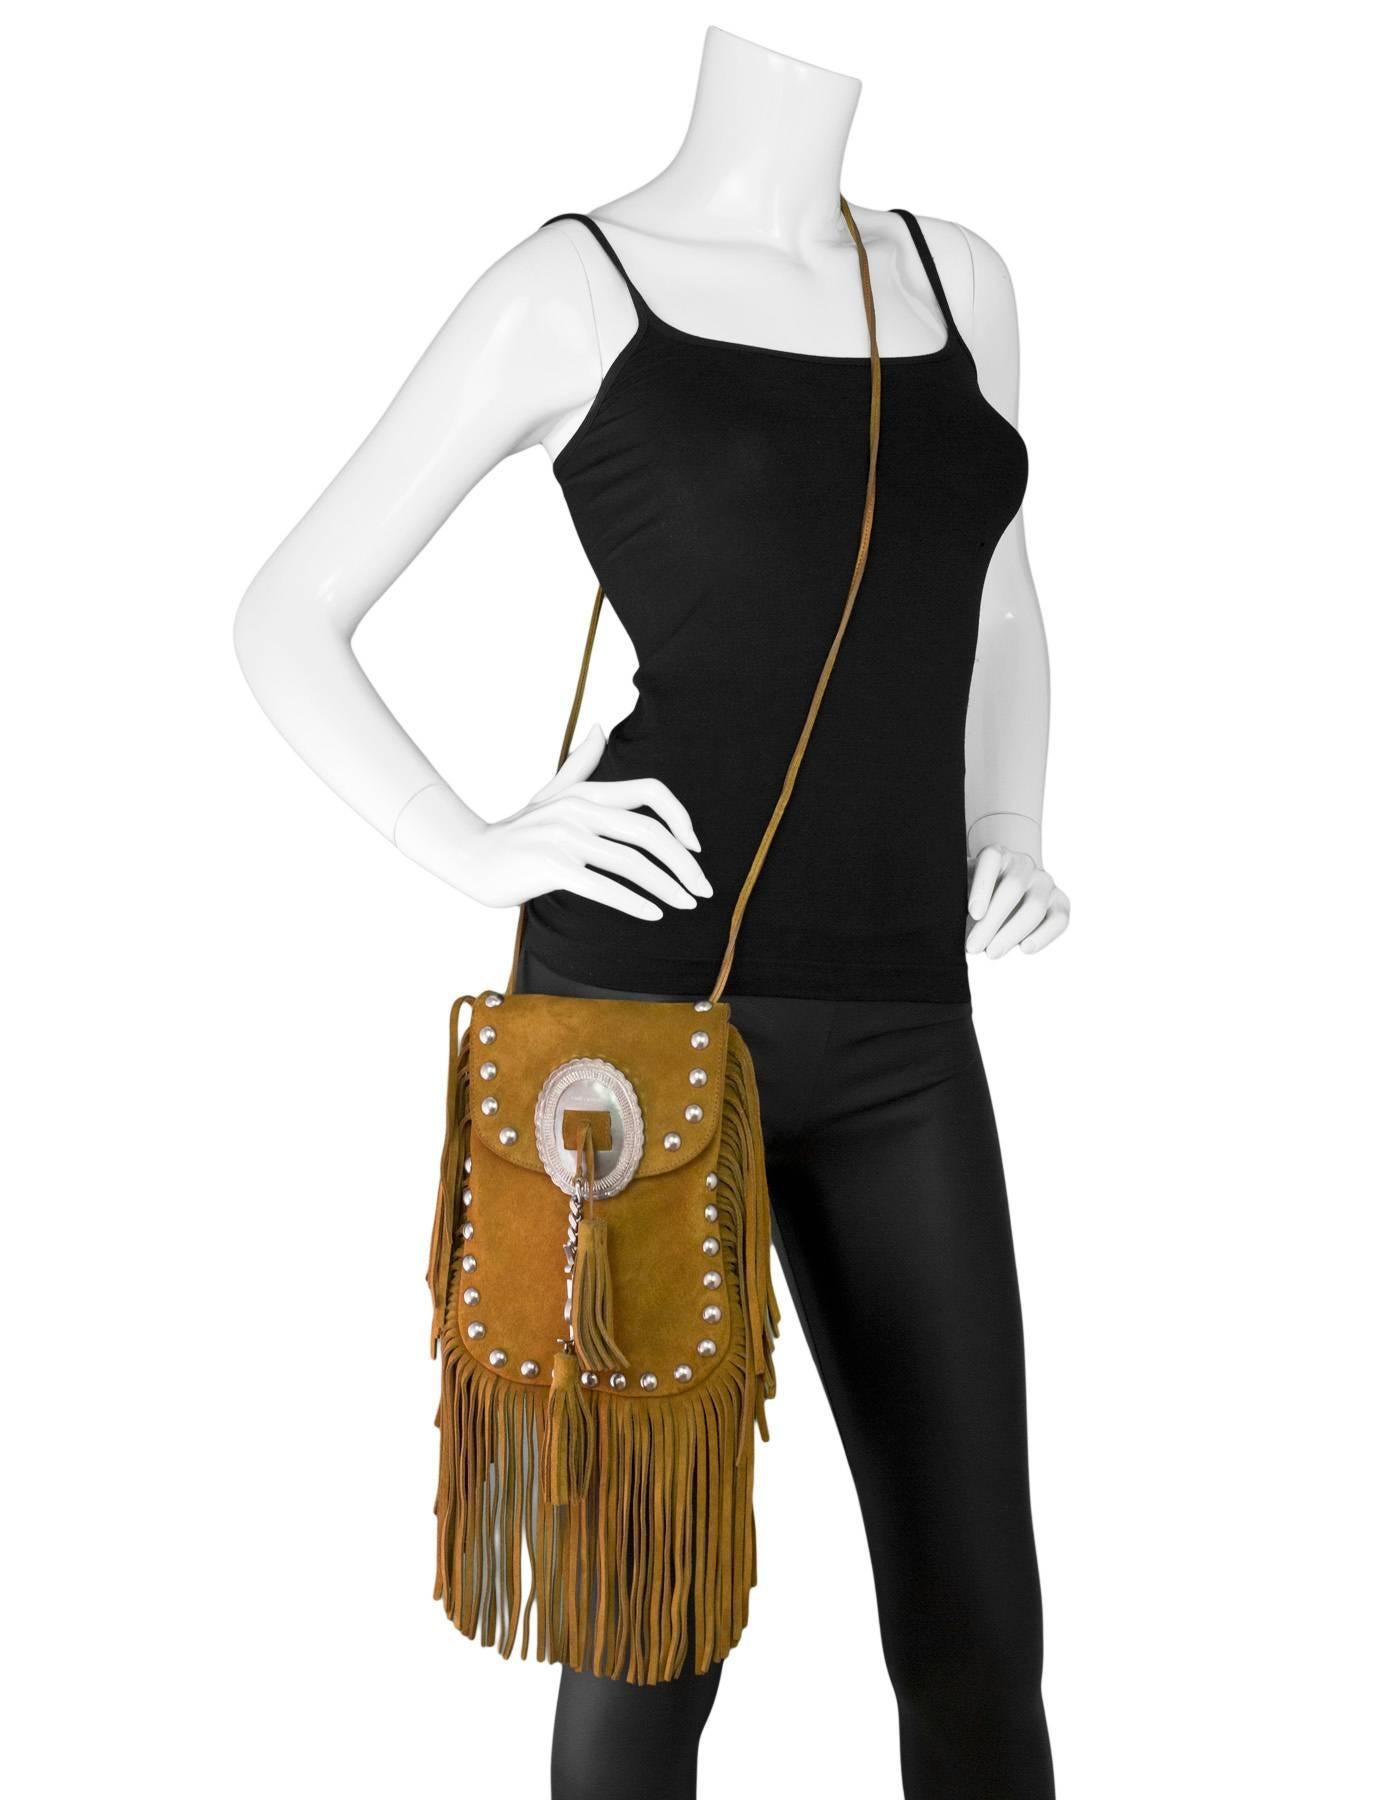 Saint Laurent Tan Suede Anita Fringe Crossbody Bag
Features fringe throughout and western accents

Made In: Italy
Color: Tan
Hardware: Silvertone
Materials: Suede, metal
Lining: Suede
Closure/Opening: Flap top
Exterior Pockets: None
Interior